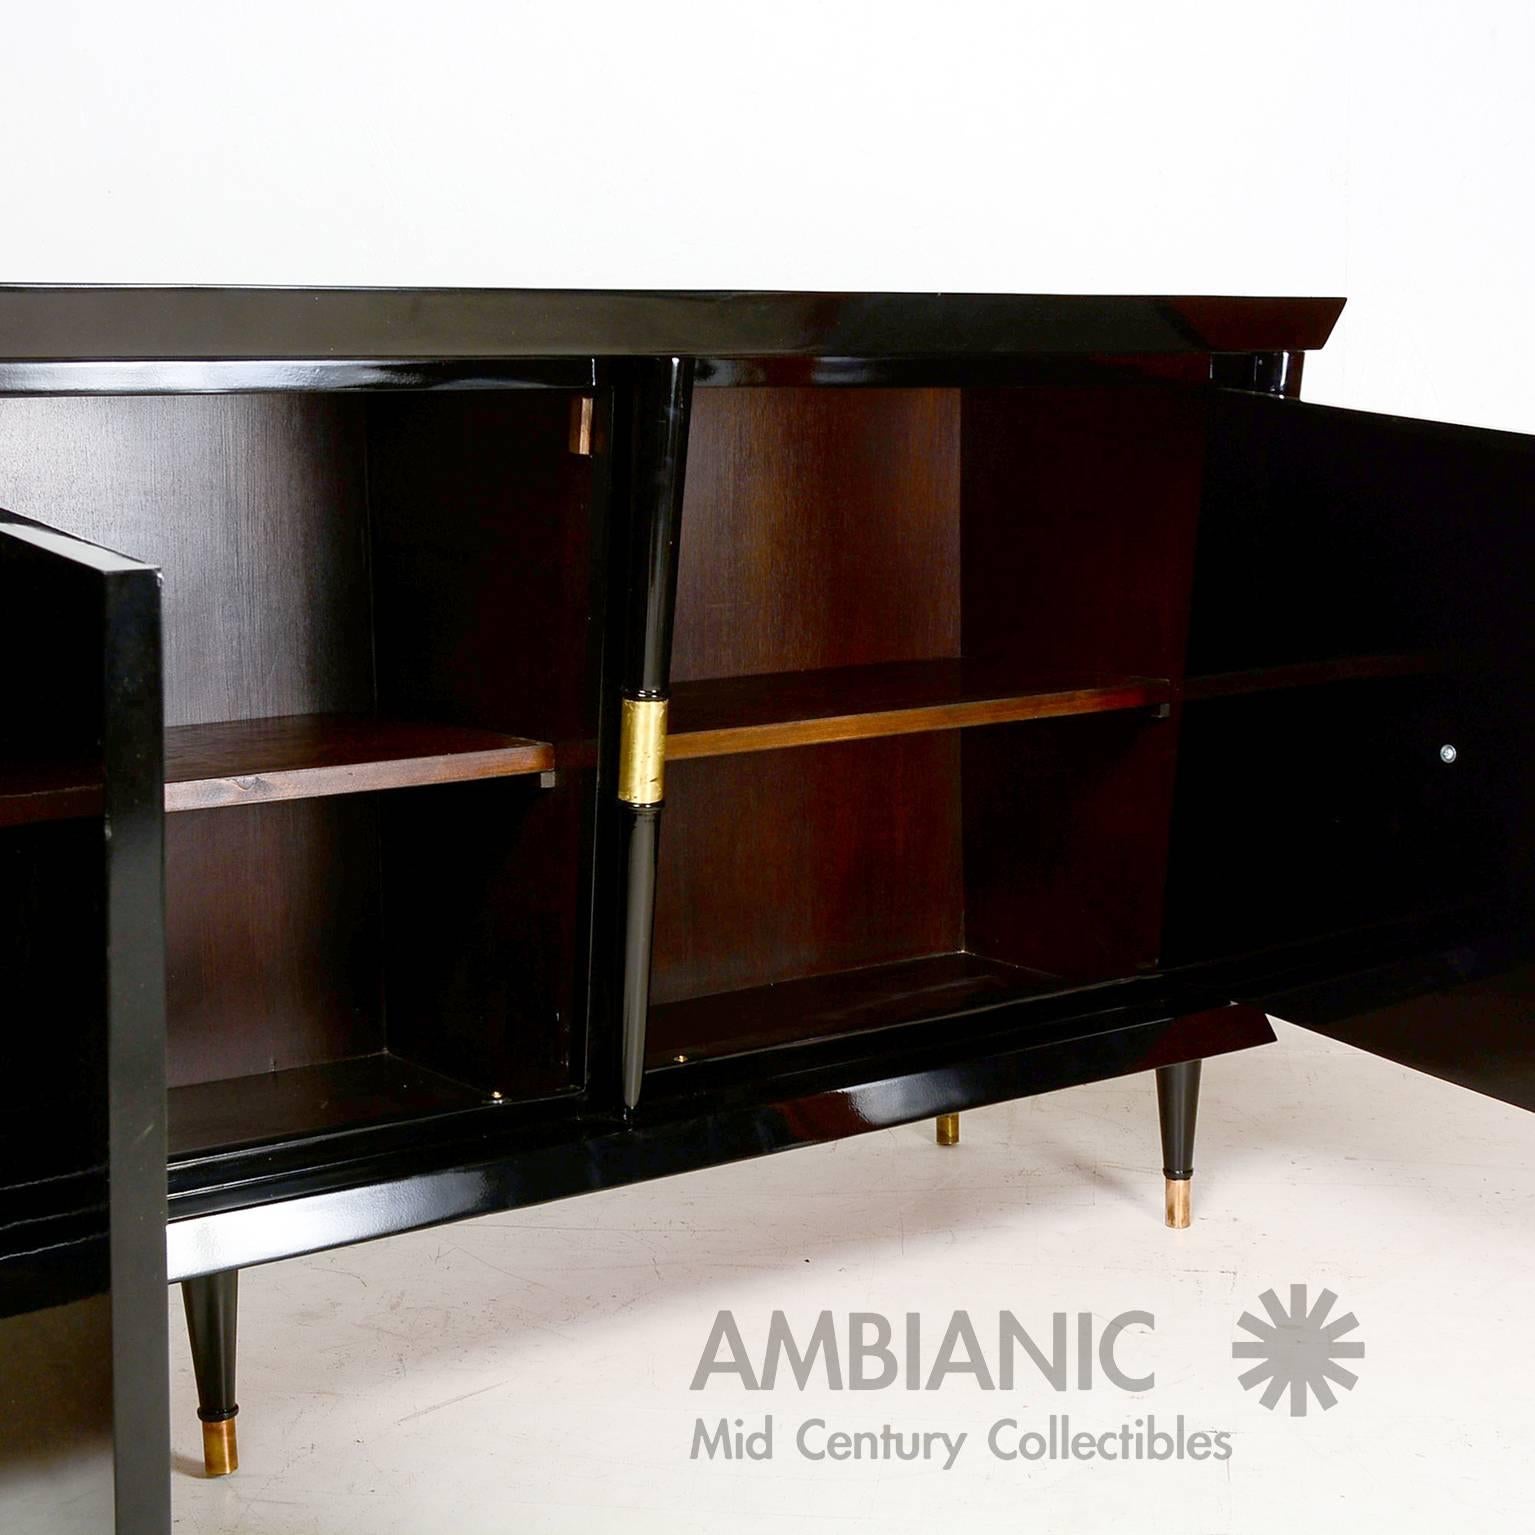 Mid-20th Century Mexican Modernist Credenza in Black Lacquer with Brass and Goatskin Accents